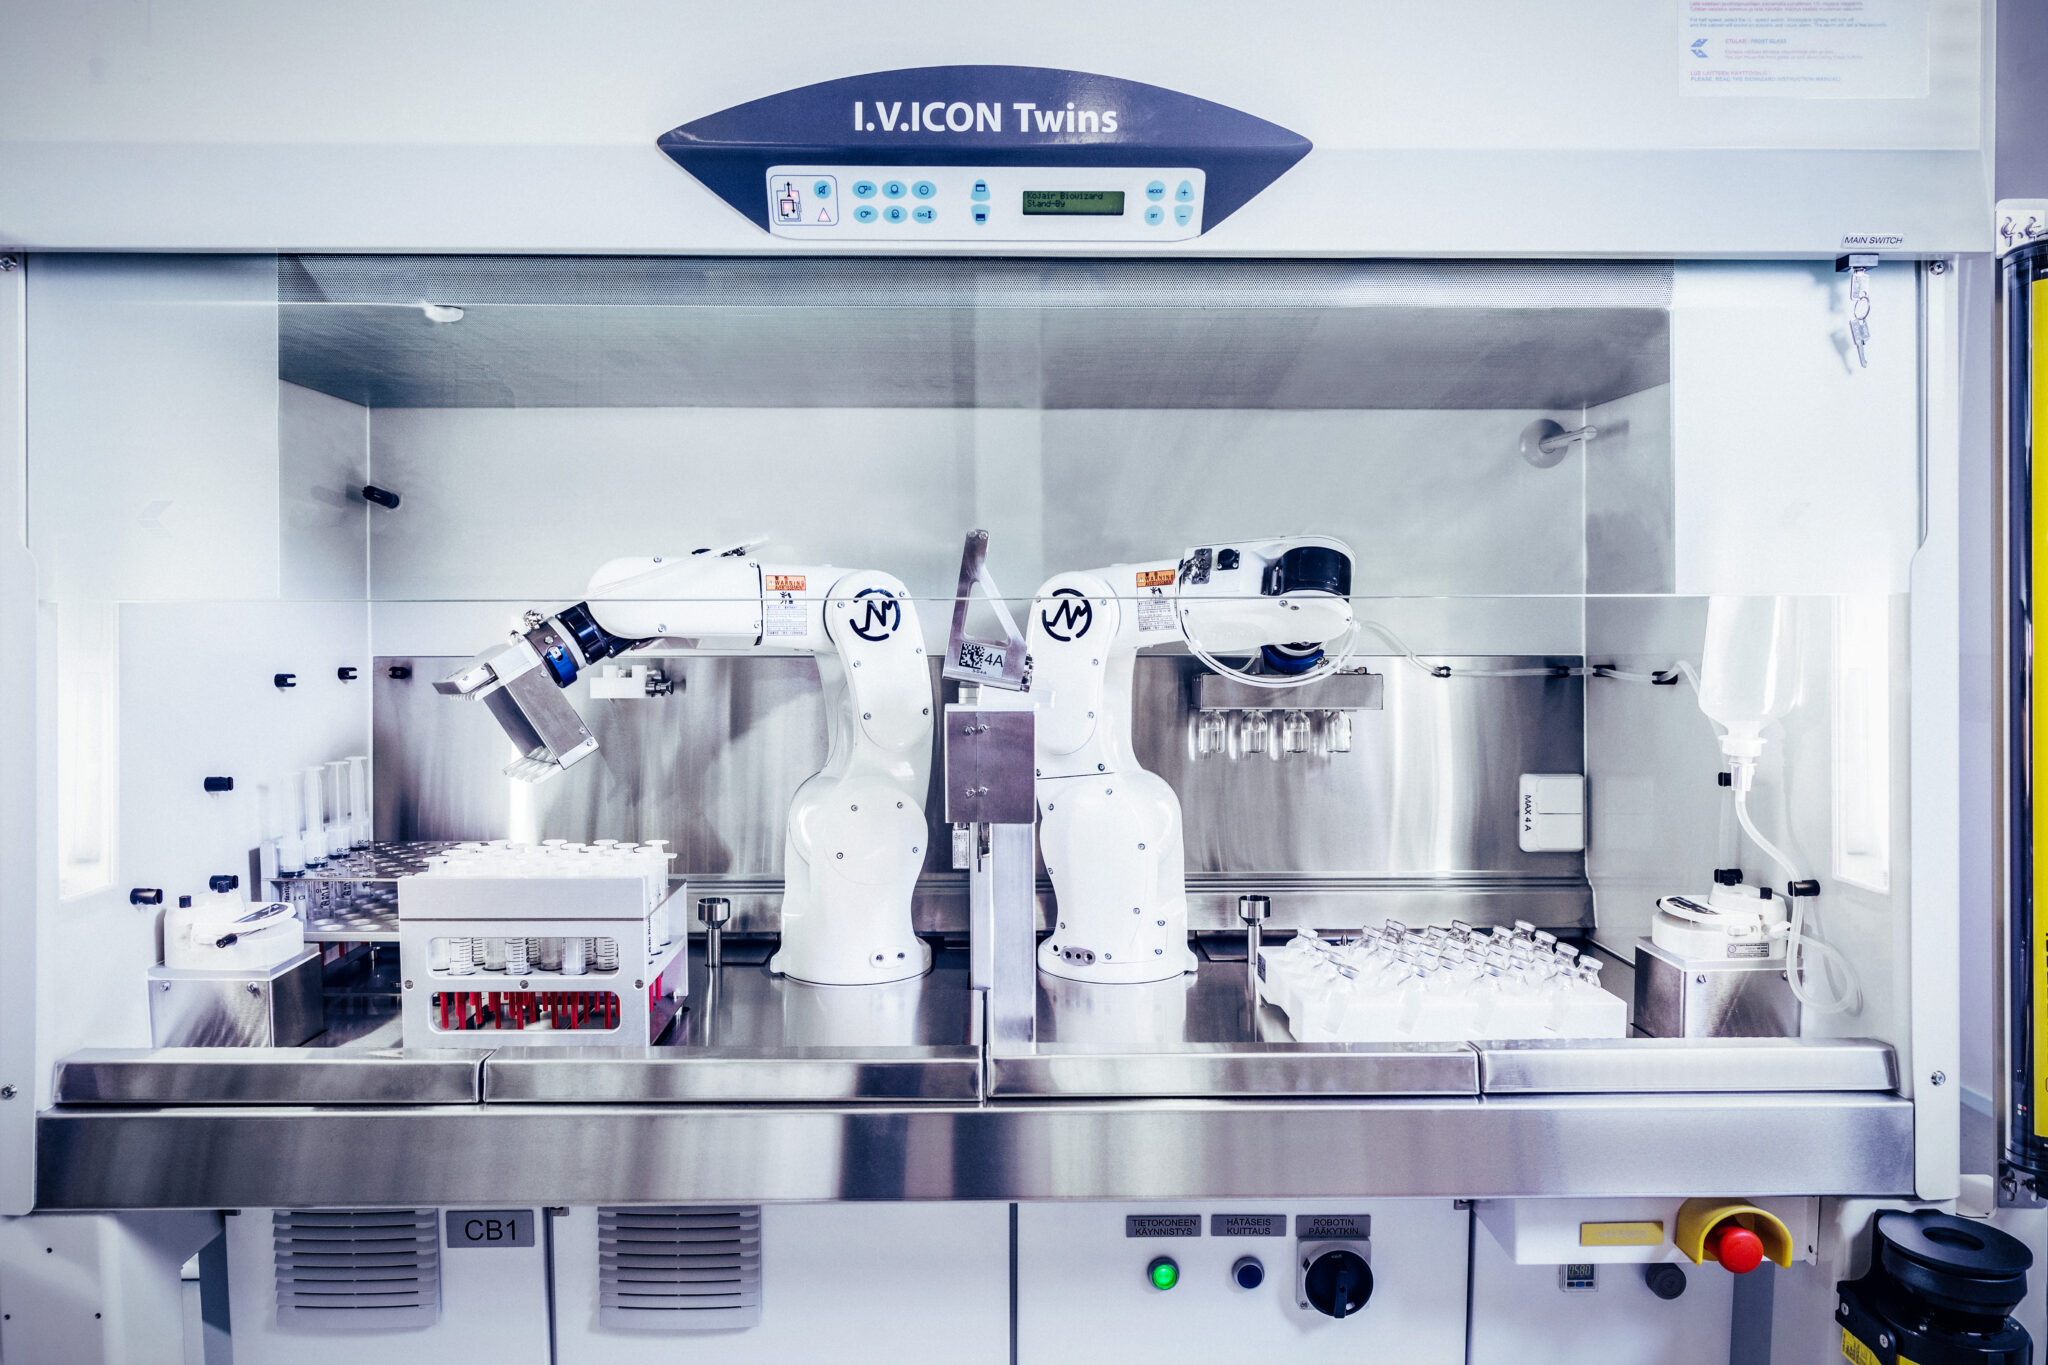 IV ICON Twins – From an antibiotic robot to a multi-function compounding platform